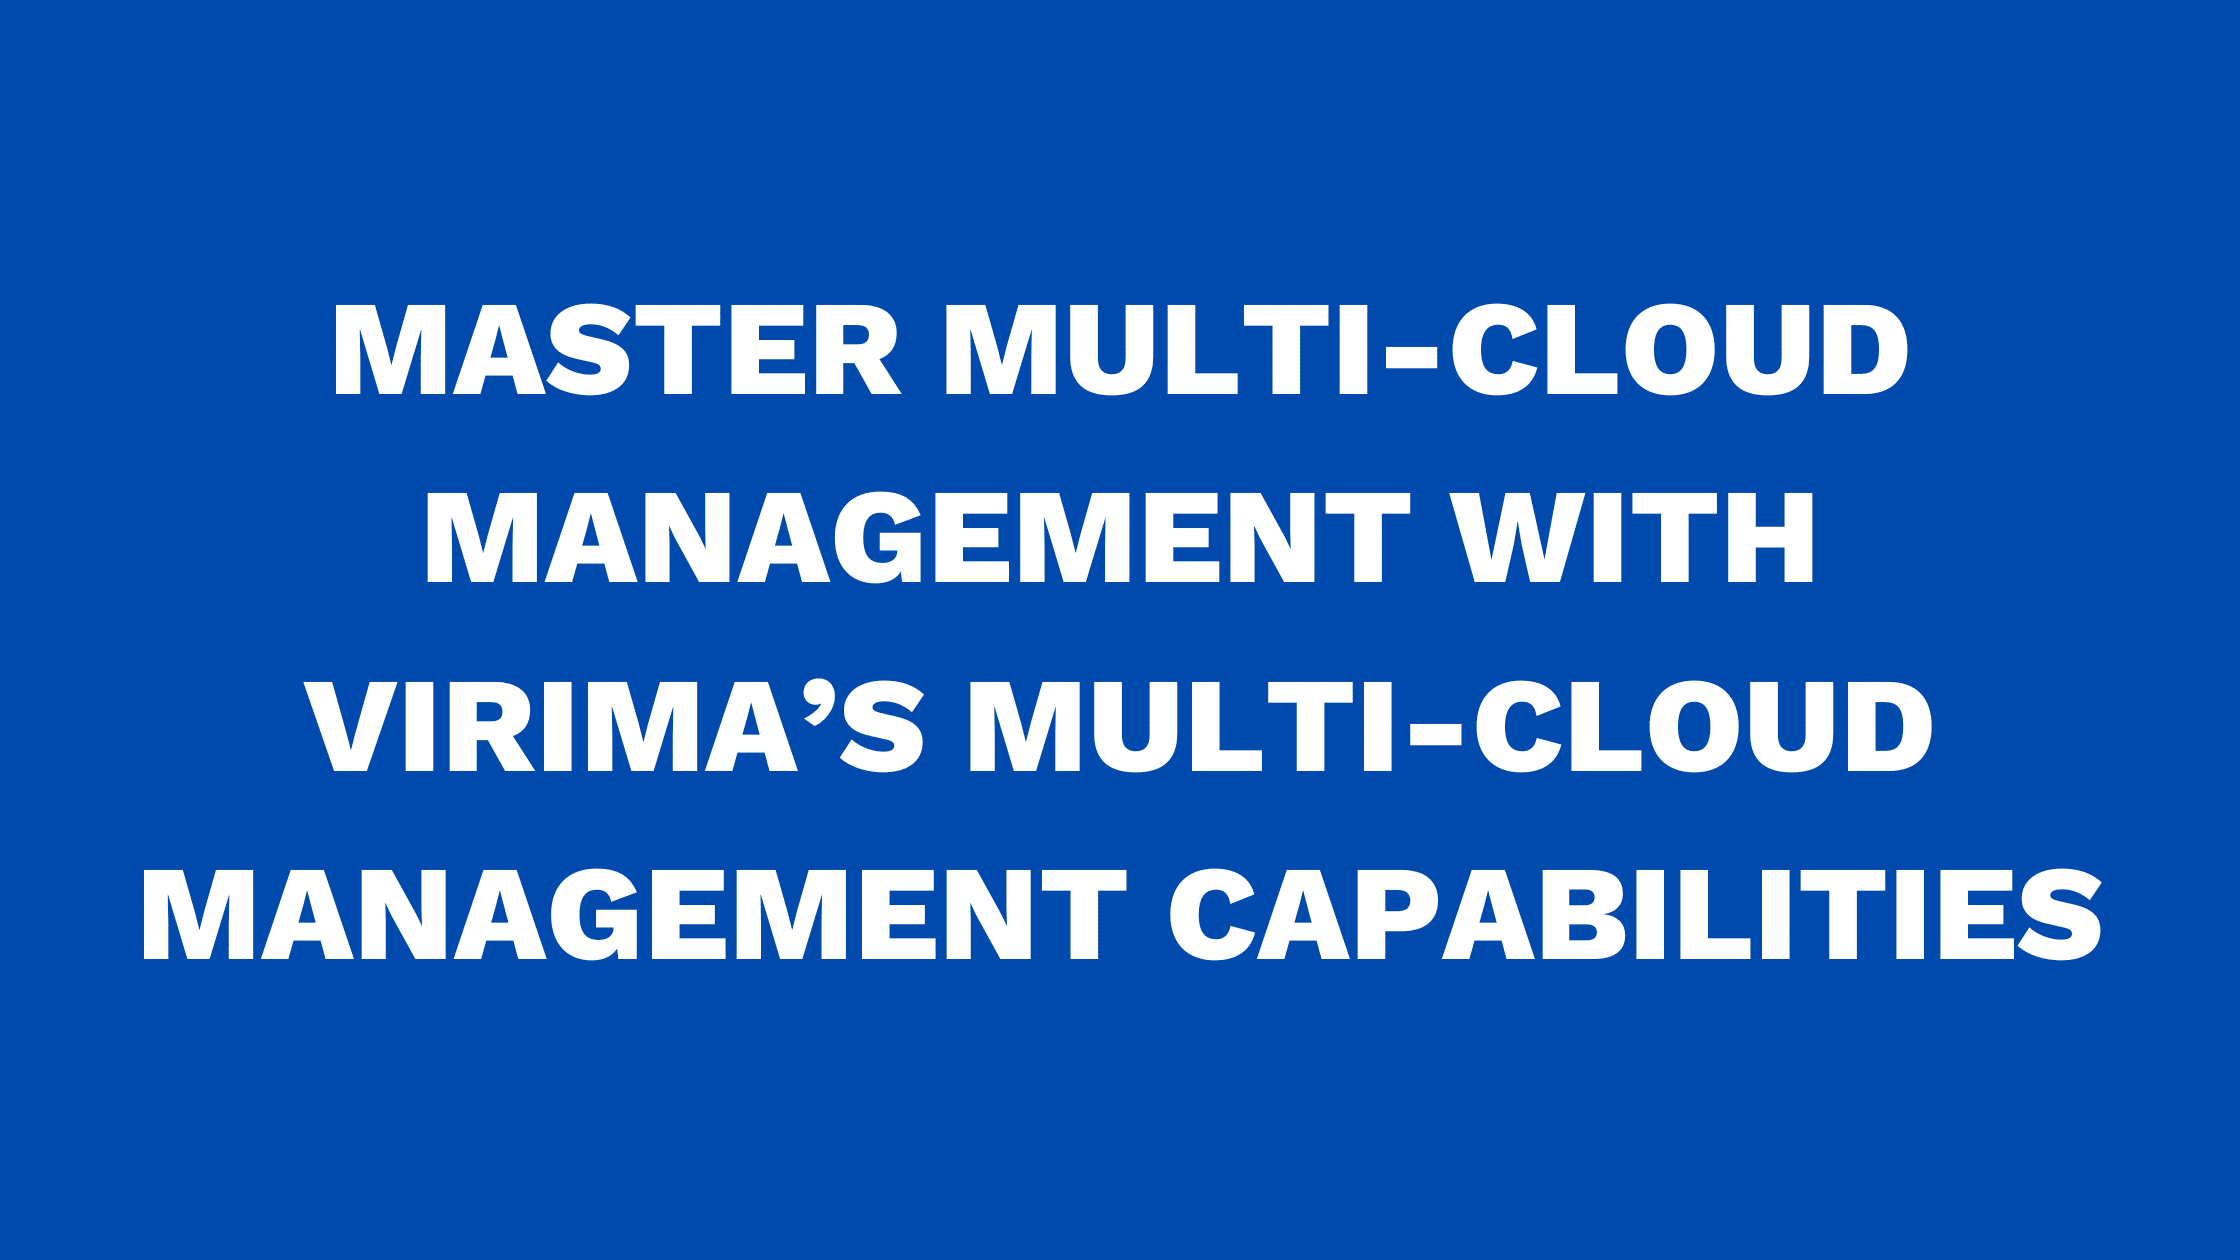 Master multi-cloud management with Virima’s Multi-Cloud Management capabilities